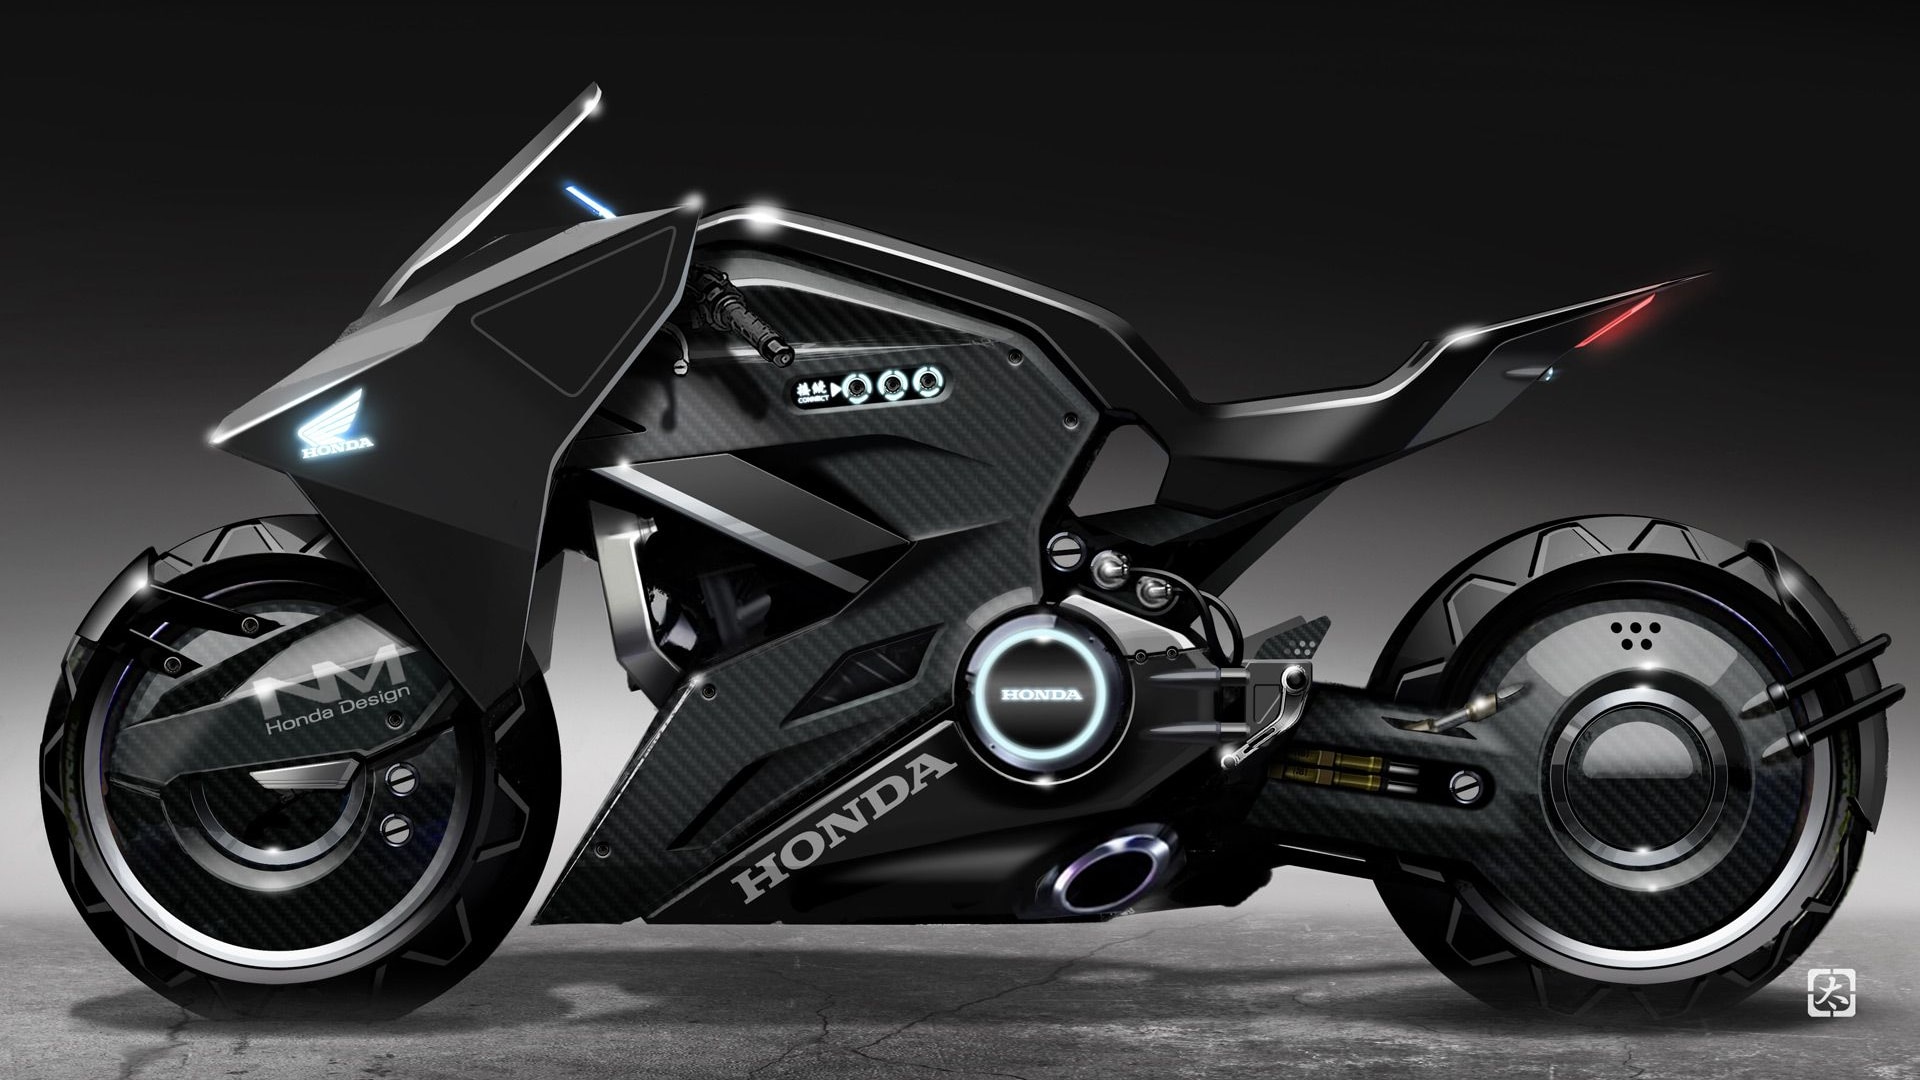 Futuristic Honda motorcycle to star in 'Ghost in the Shell'